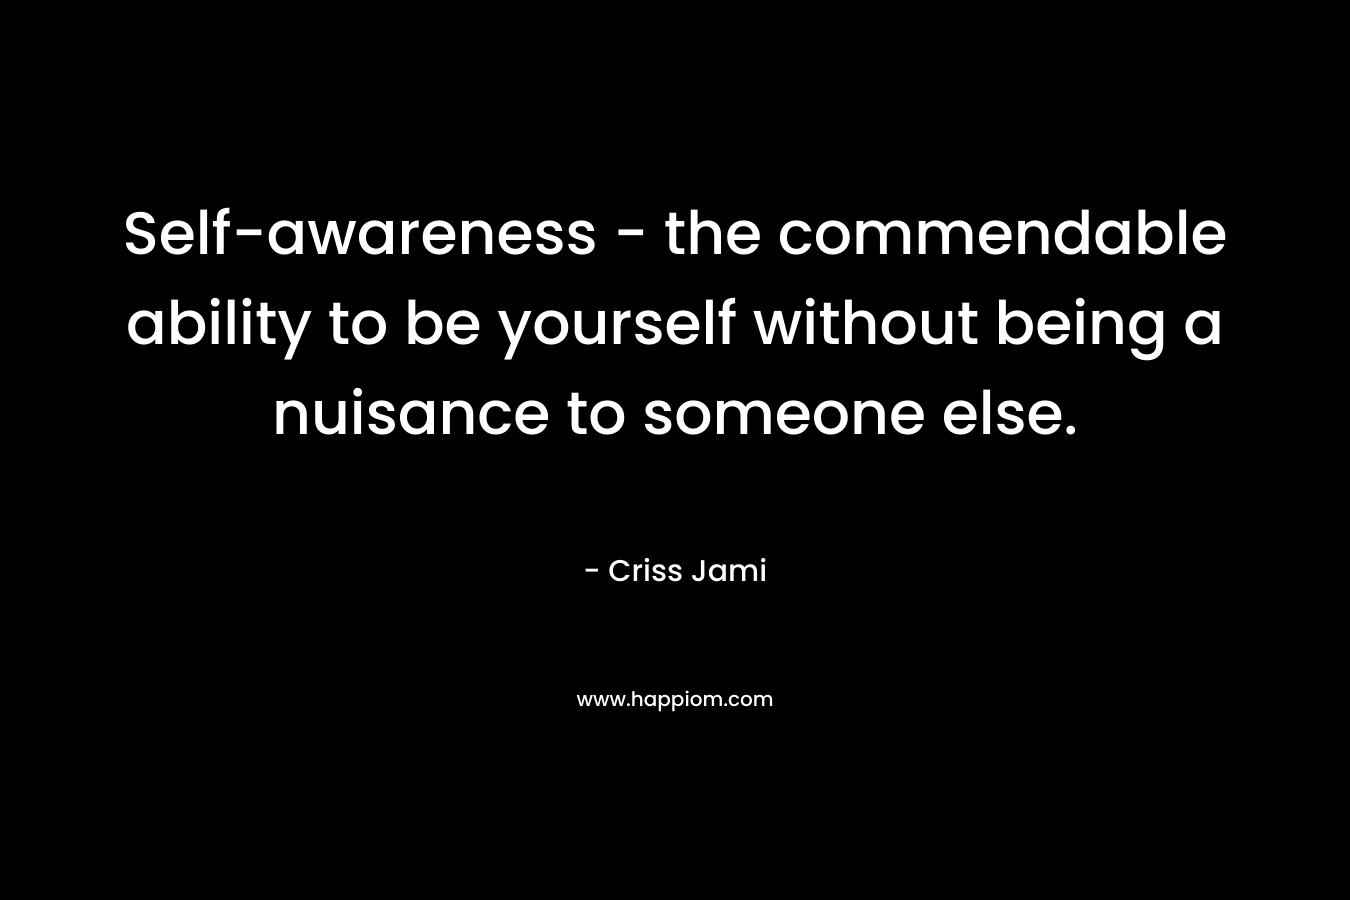 Self-awareness - the commendable ability to be yourself without being a nuisance to someone else.